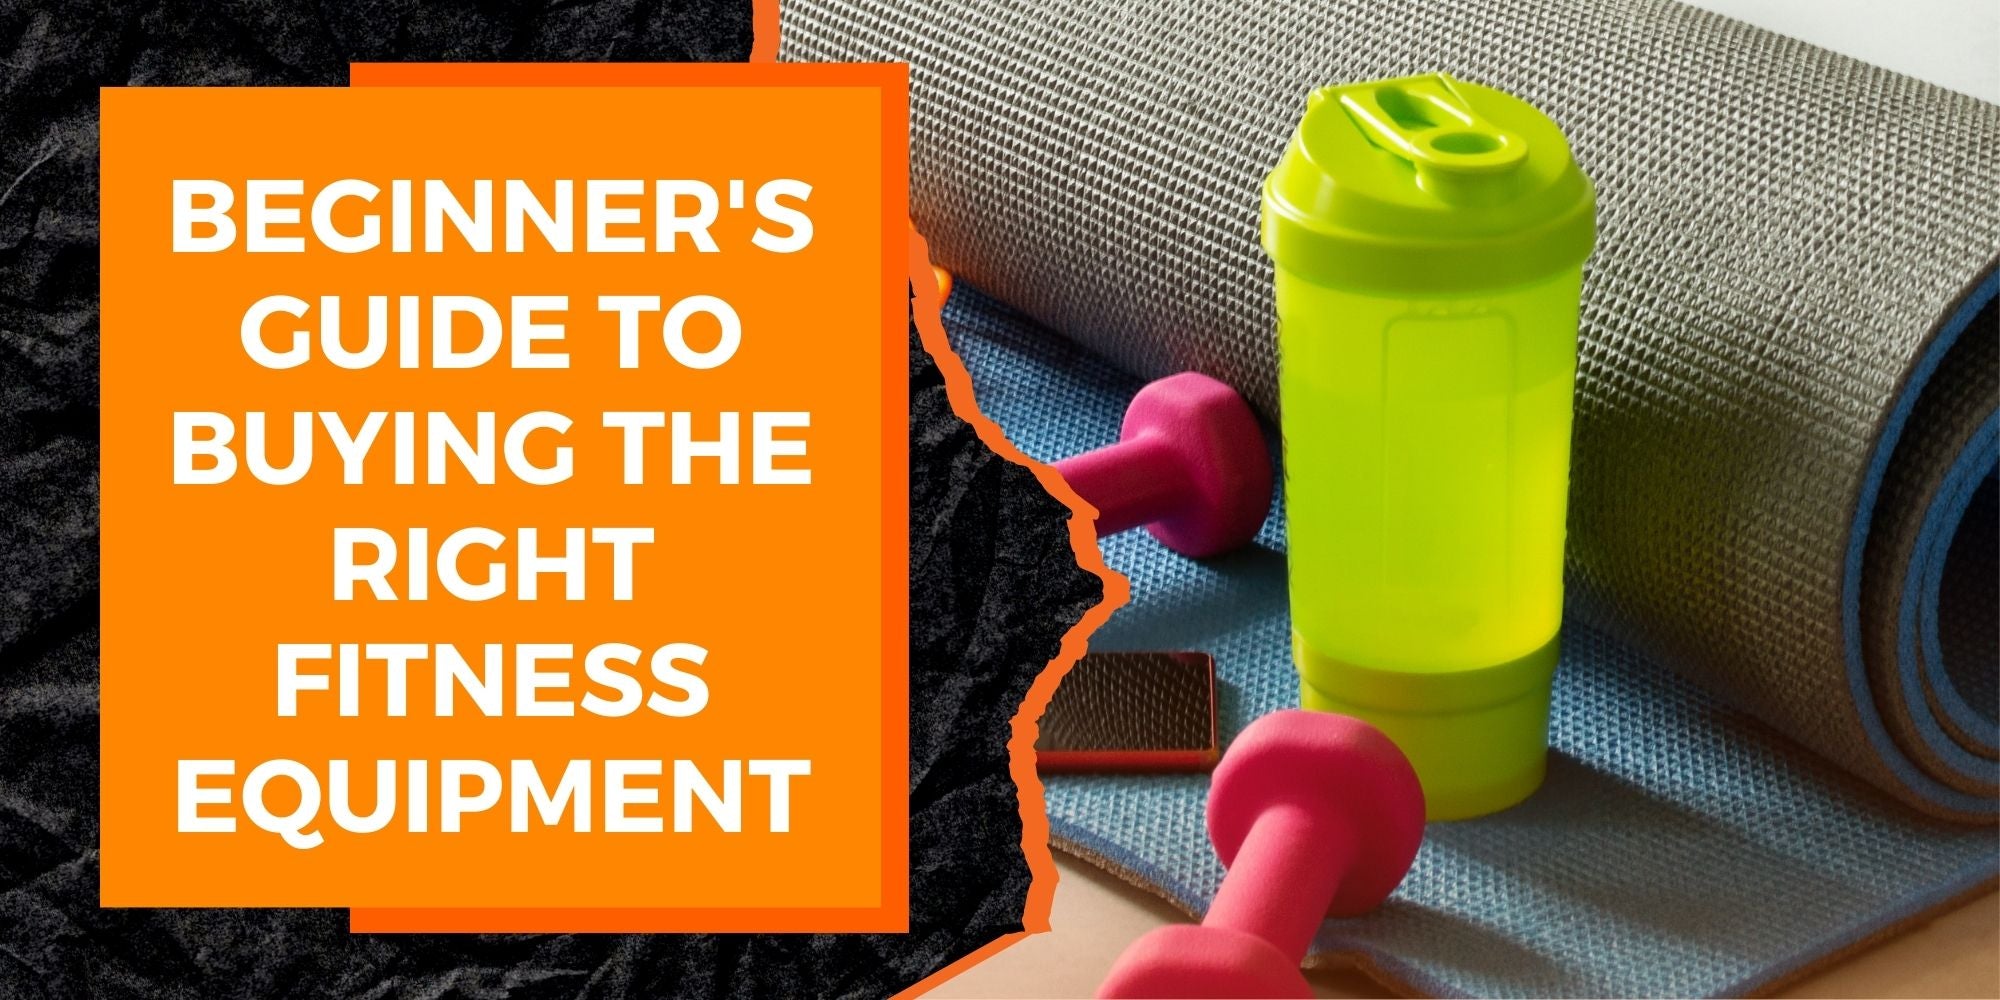 A Beginner's Guide to Buying the Right Fitness Equipment